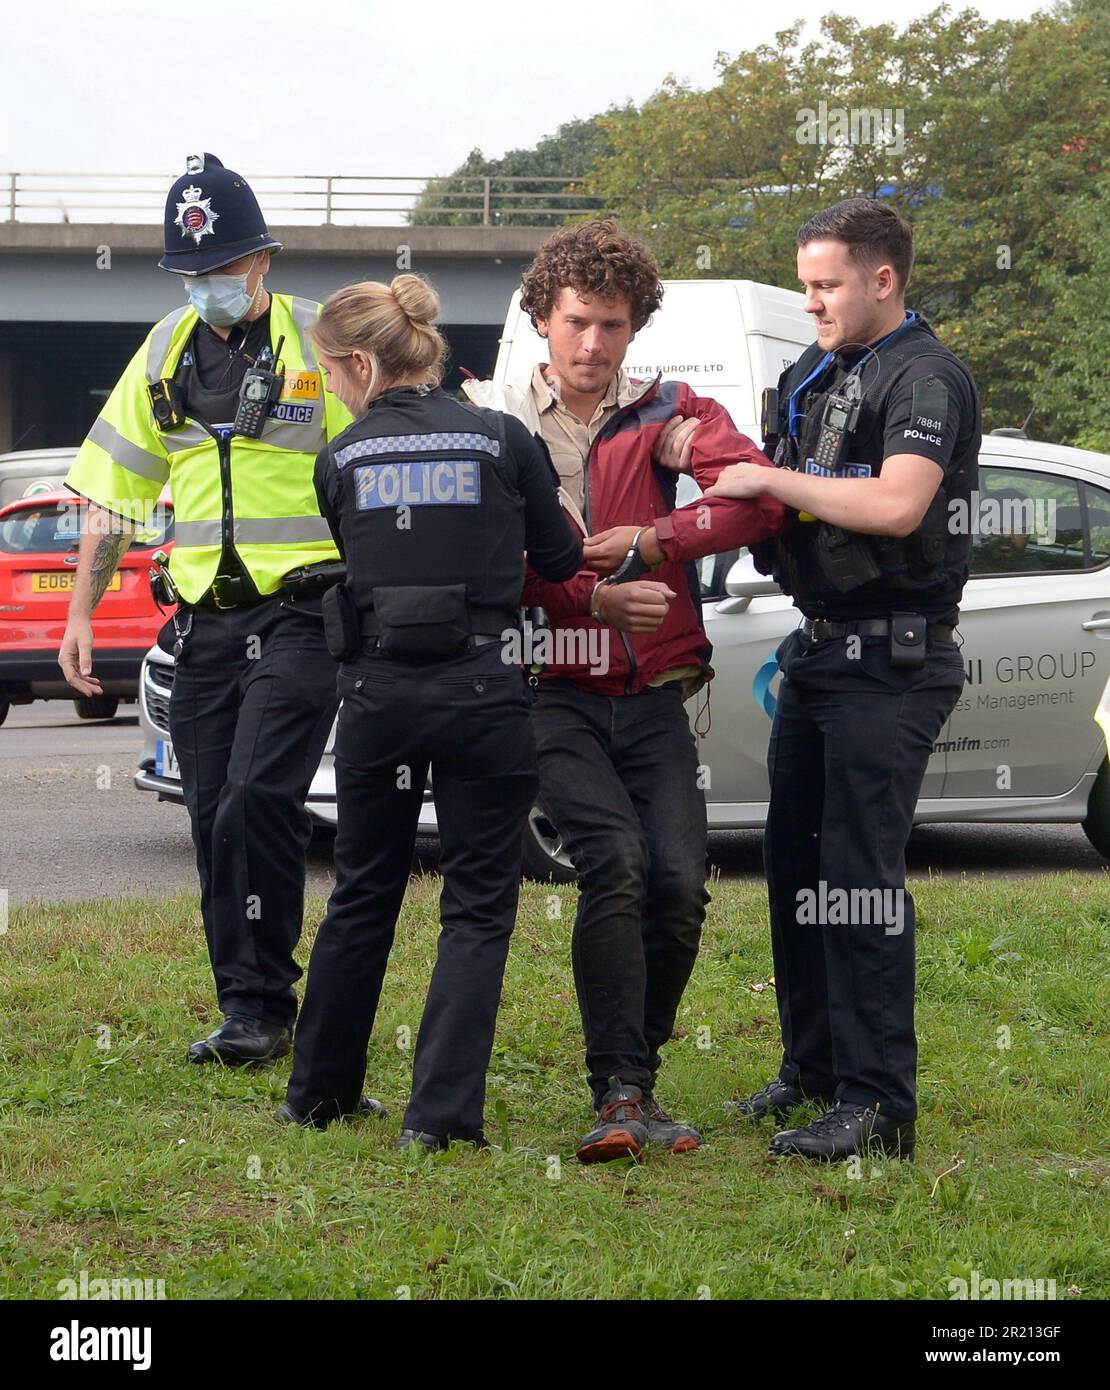 Police arrest climate change protesters who attempted to block the M25 at junction 28 near Brentwood, Essex as they demand government action on home insulation. More than 100 people were arrested in three days of protests. Protest group Insulate Britain said action would go on until a 'meaningful commitment' was made. September, 2021. Stock Photo